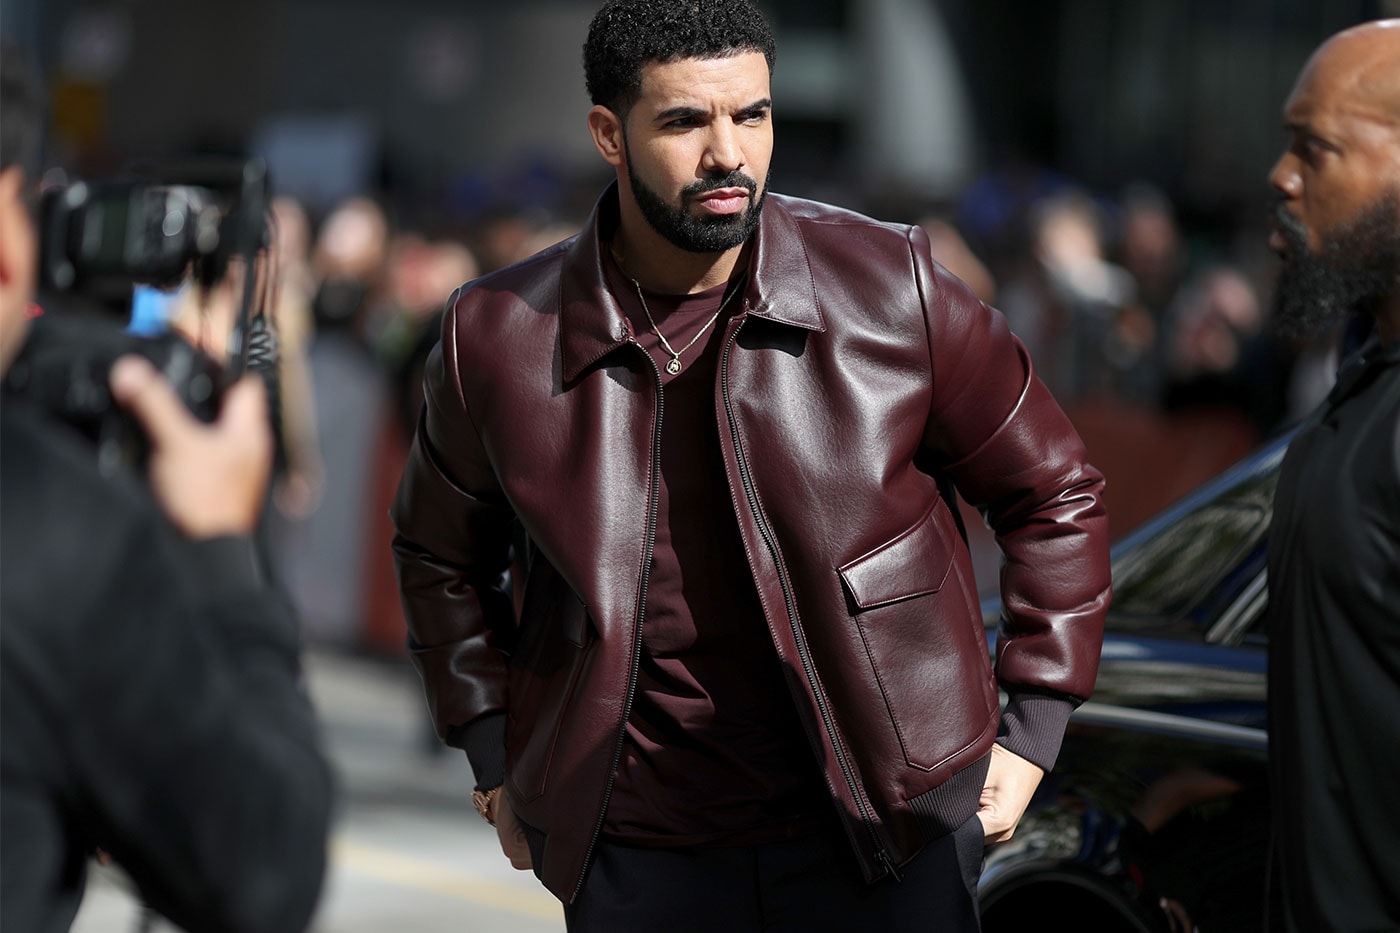 Drake Is Now Offering Virtual Tours of His Toronto Mansion bridle path certified lover boy take care drakerelated blogto studio october's very own el chico studios nocta sound 42